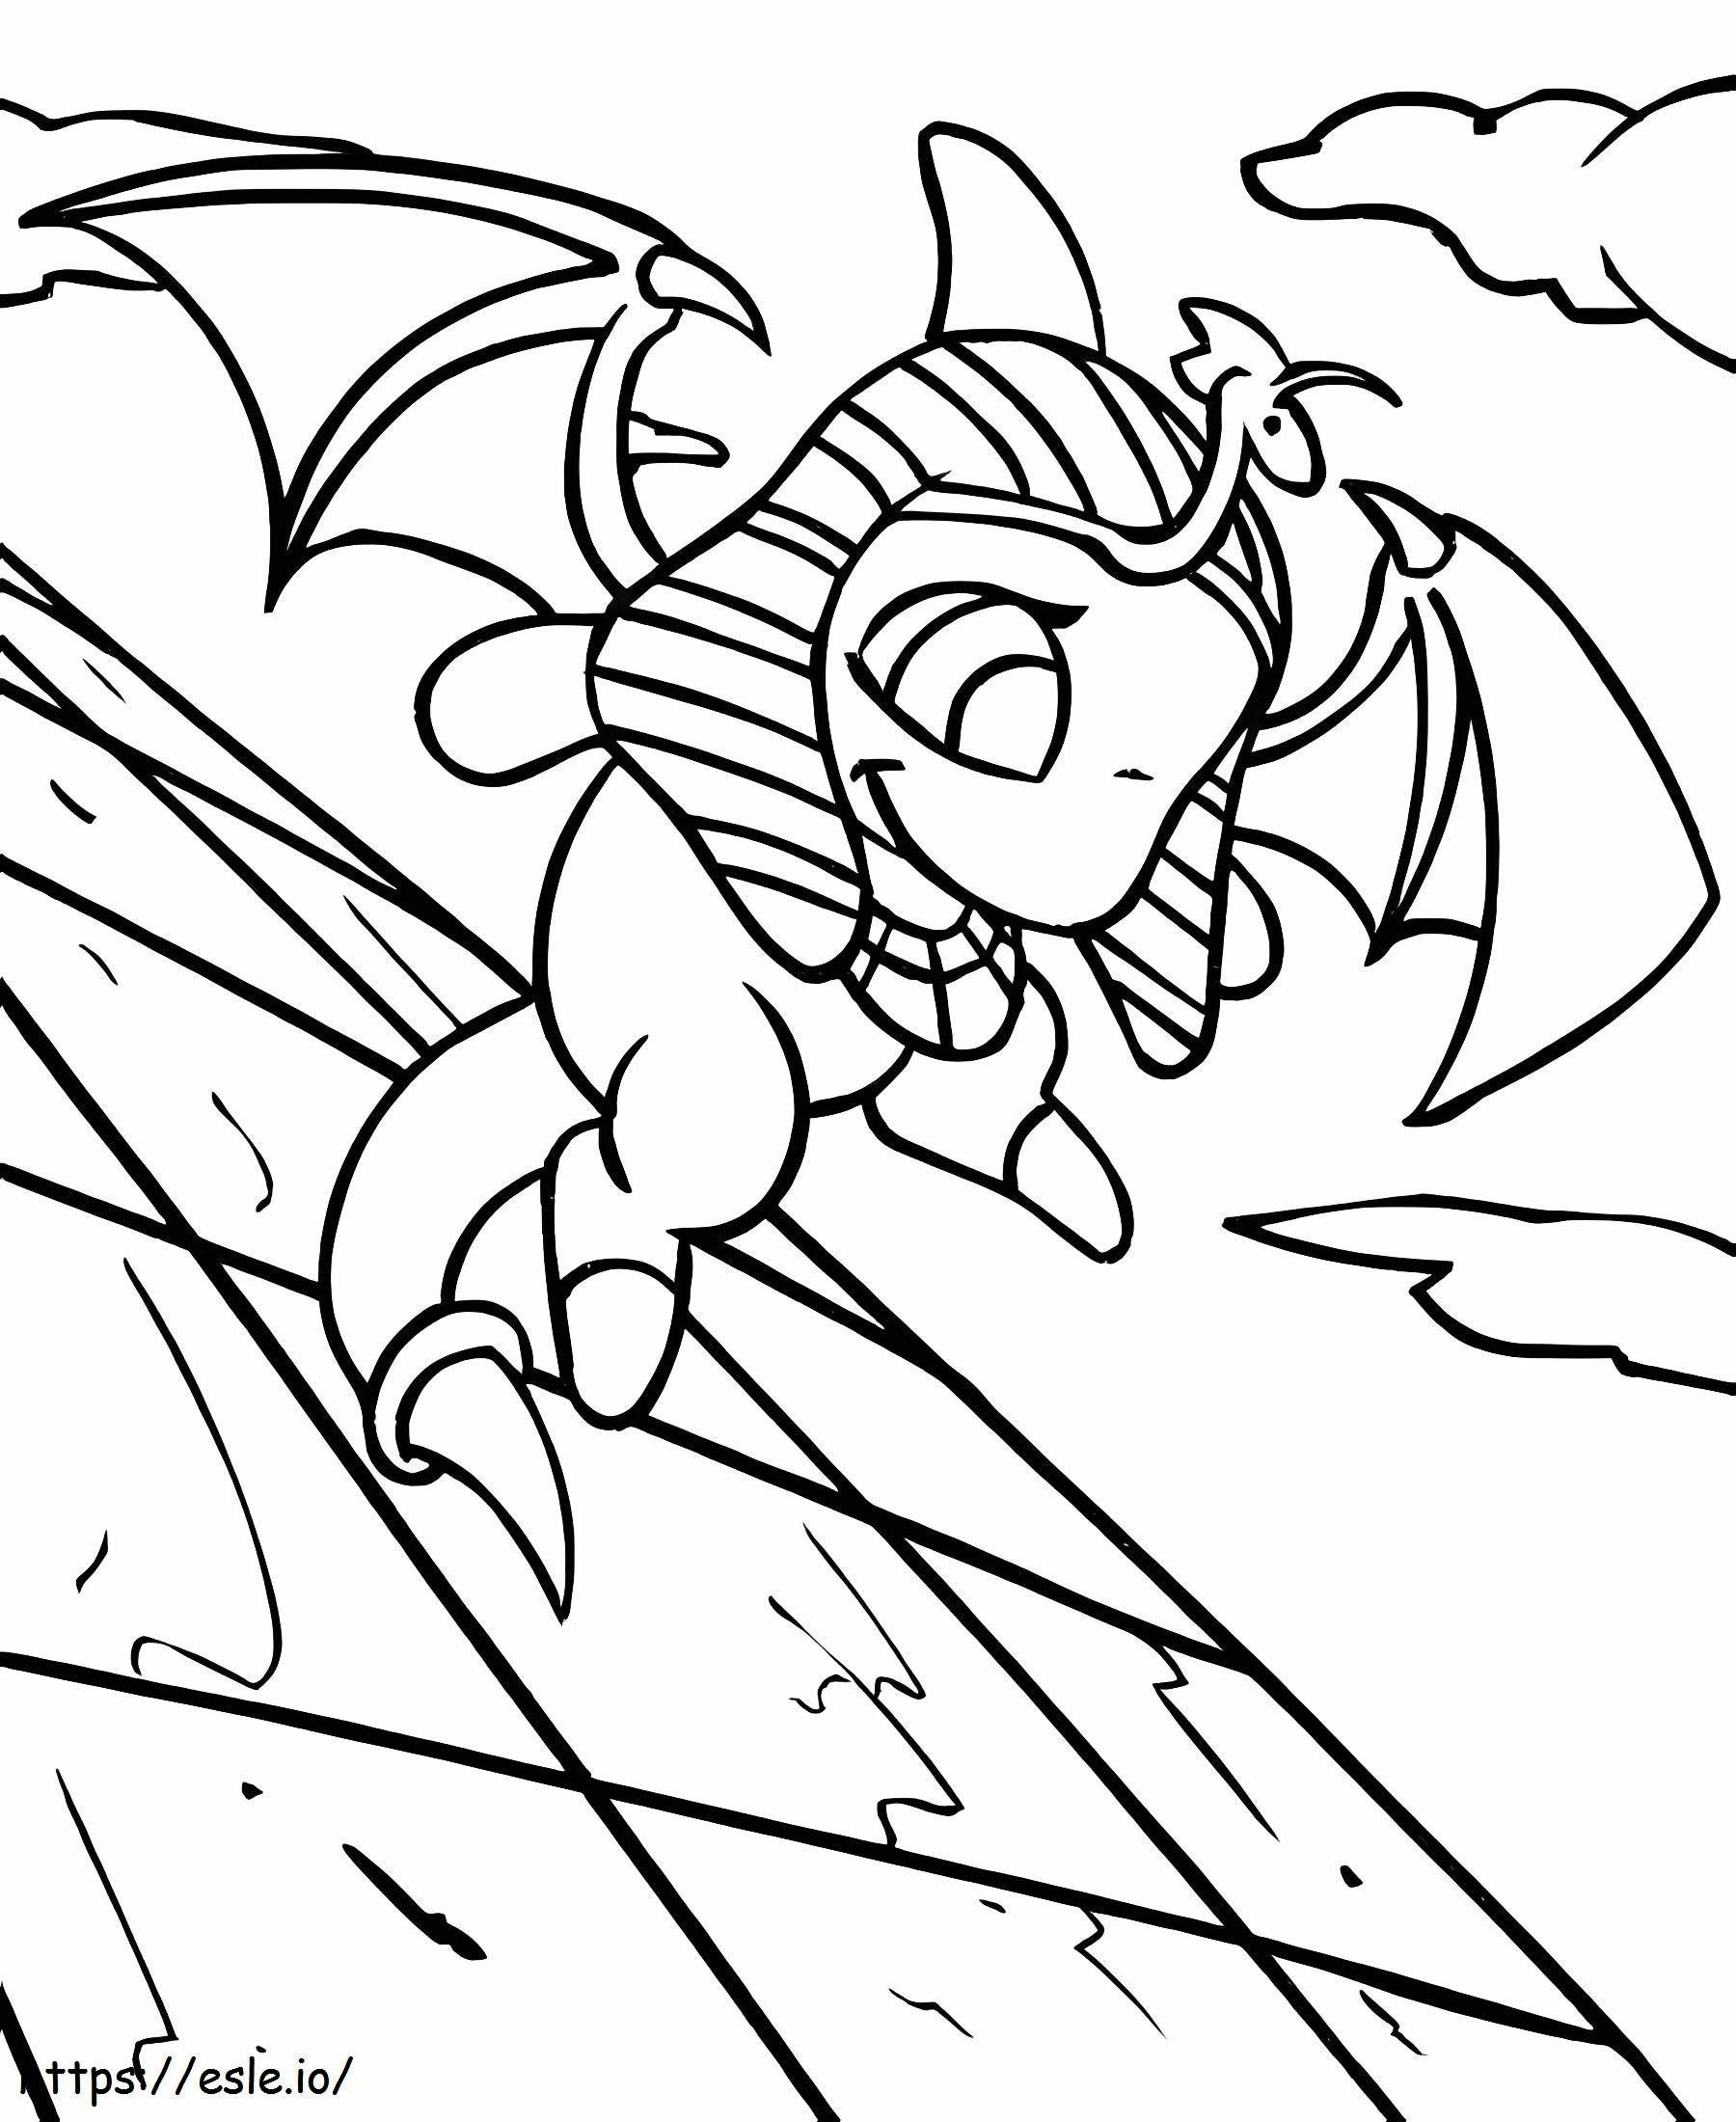 Neopets 23 coloring page